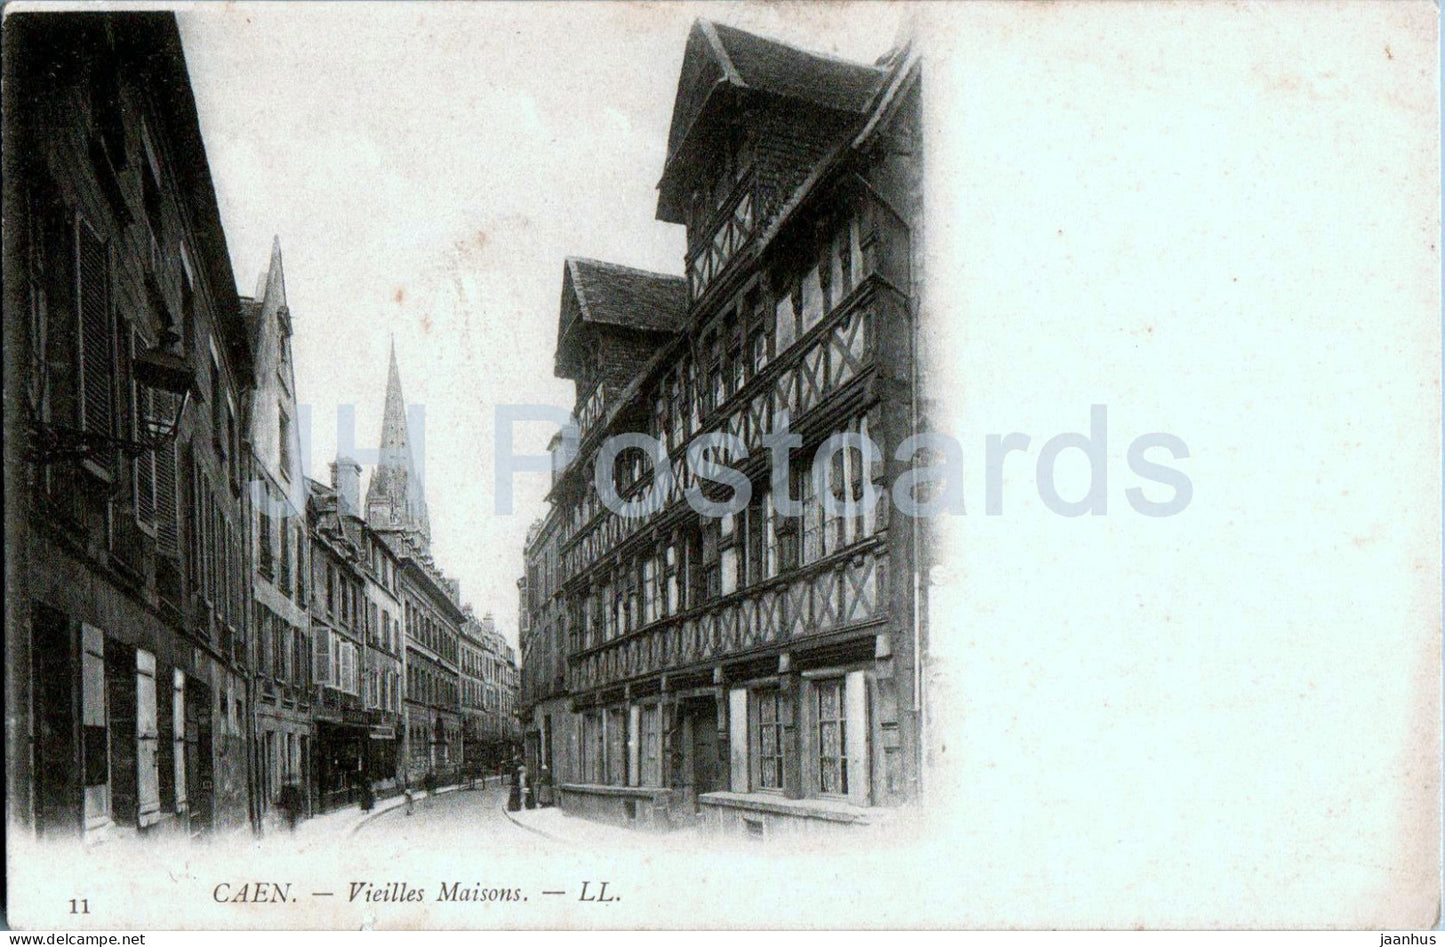 Caen - Vieilles Maisons - old houses - 11 - old postcard - France - unused - JH Postcards